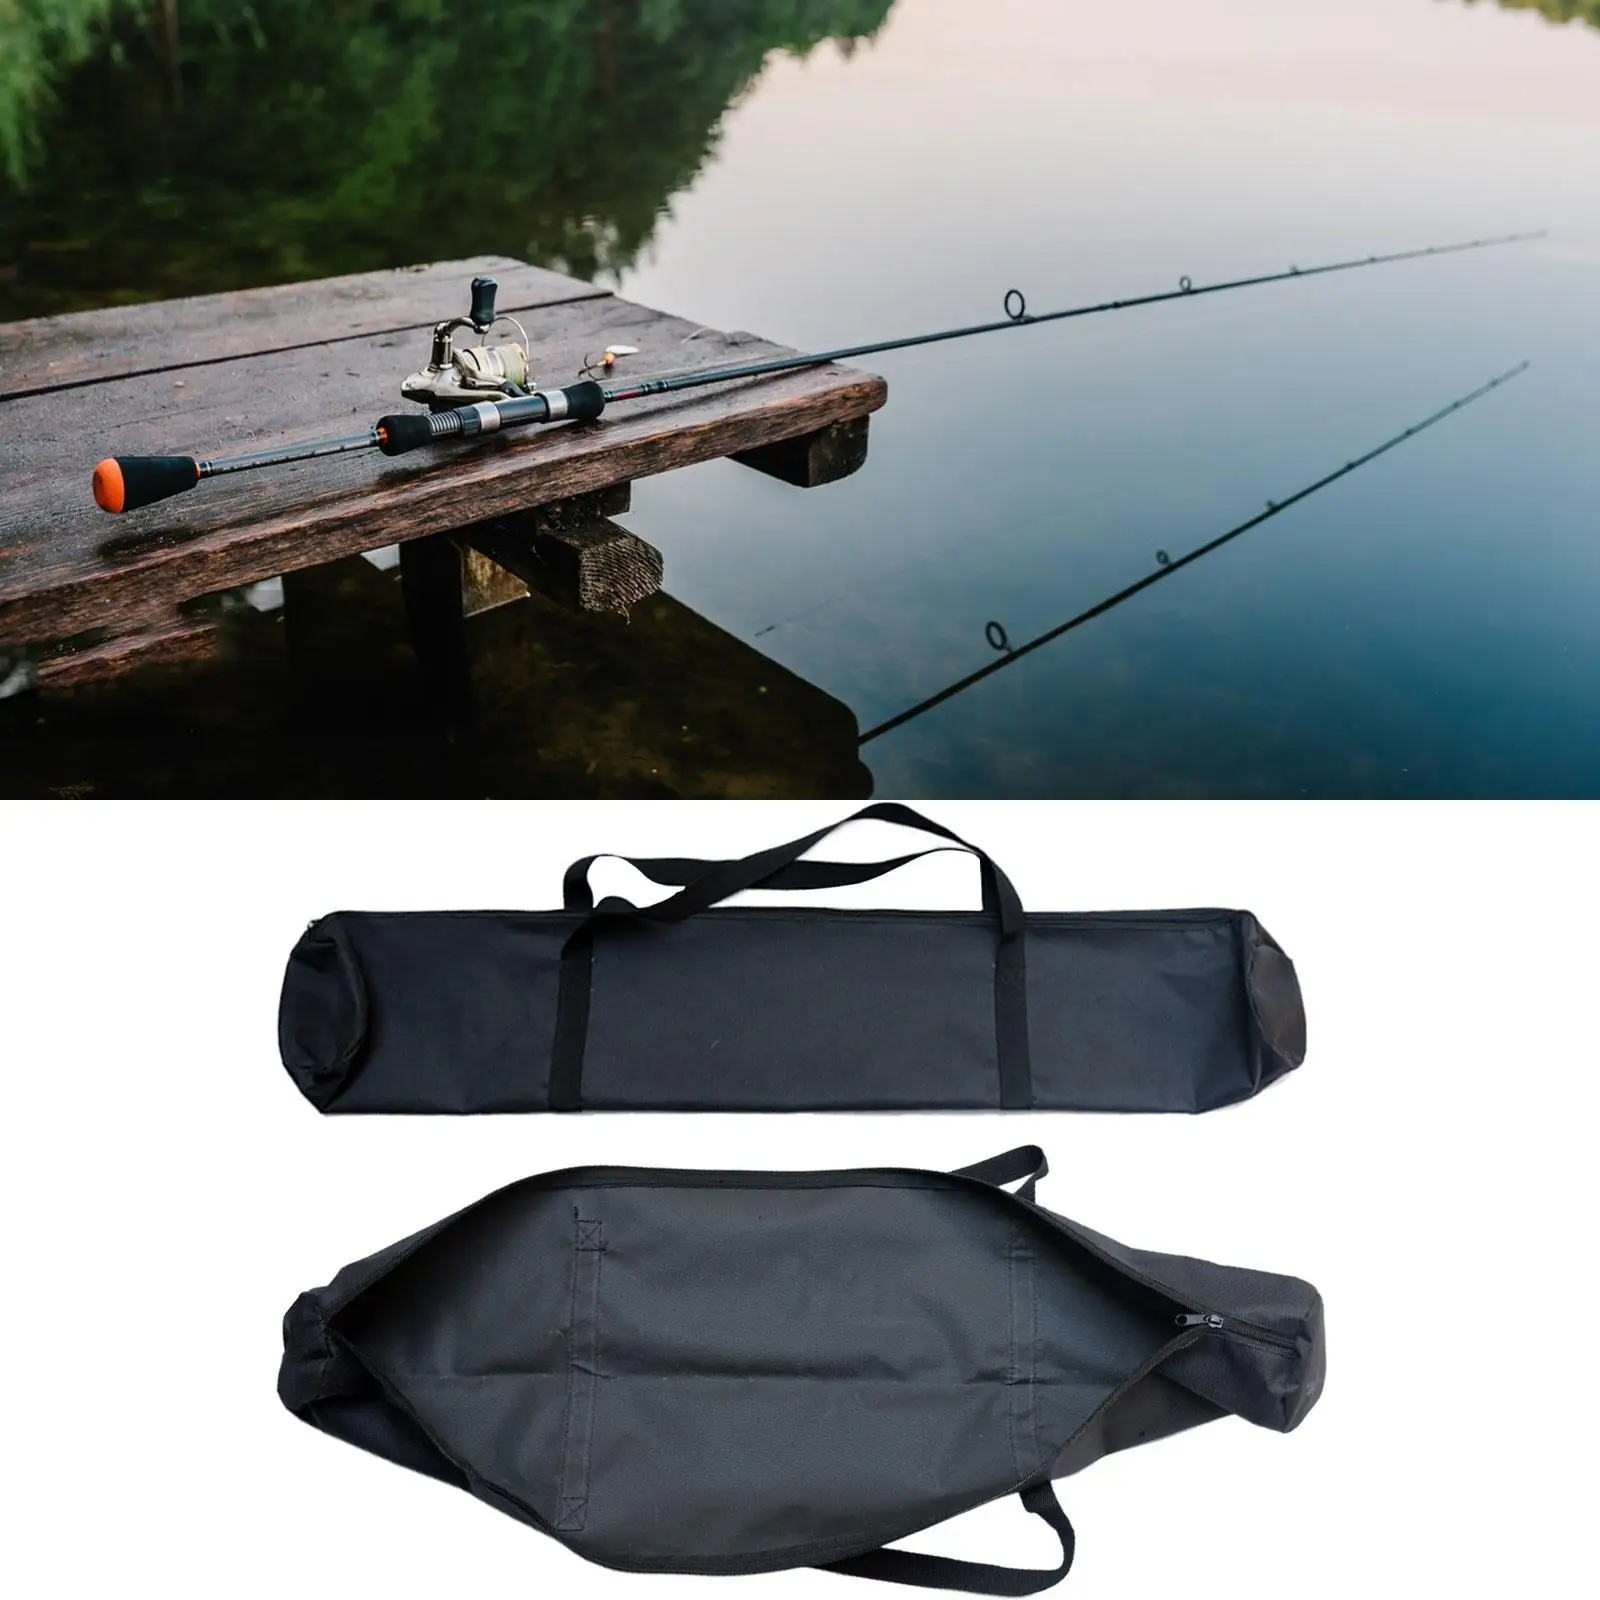 Fishing Rod Storage Bag, Large Capacity, Lightweight, Convenient, Durable Oxford